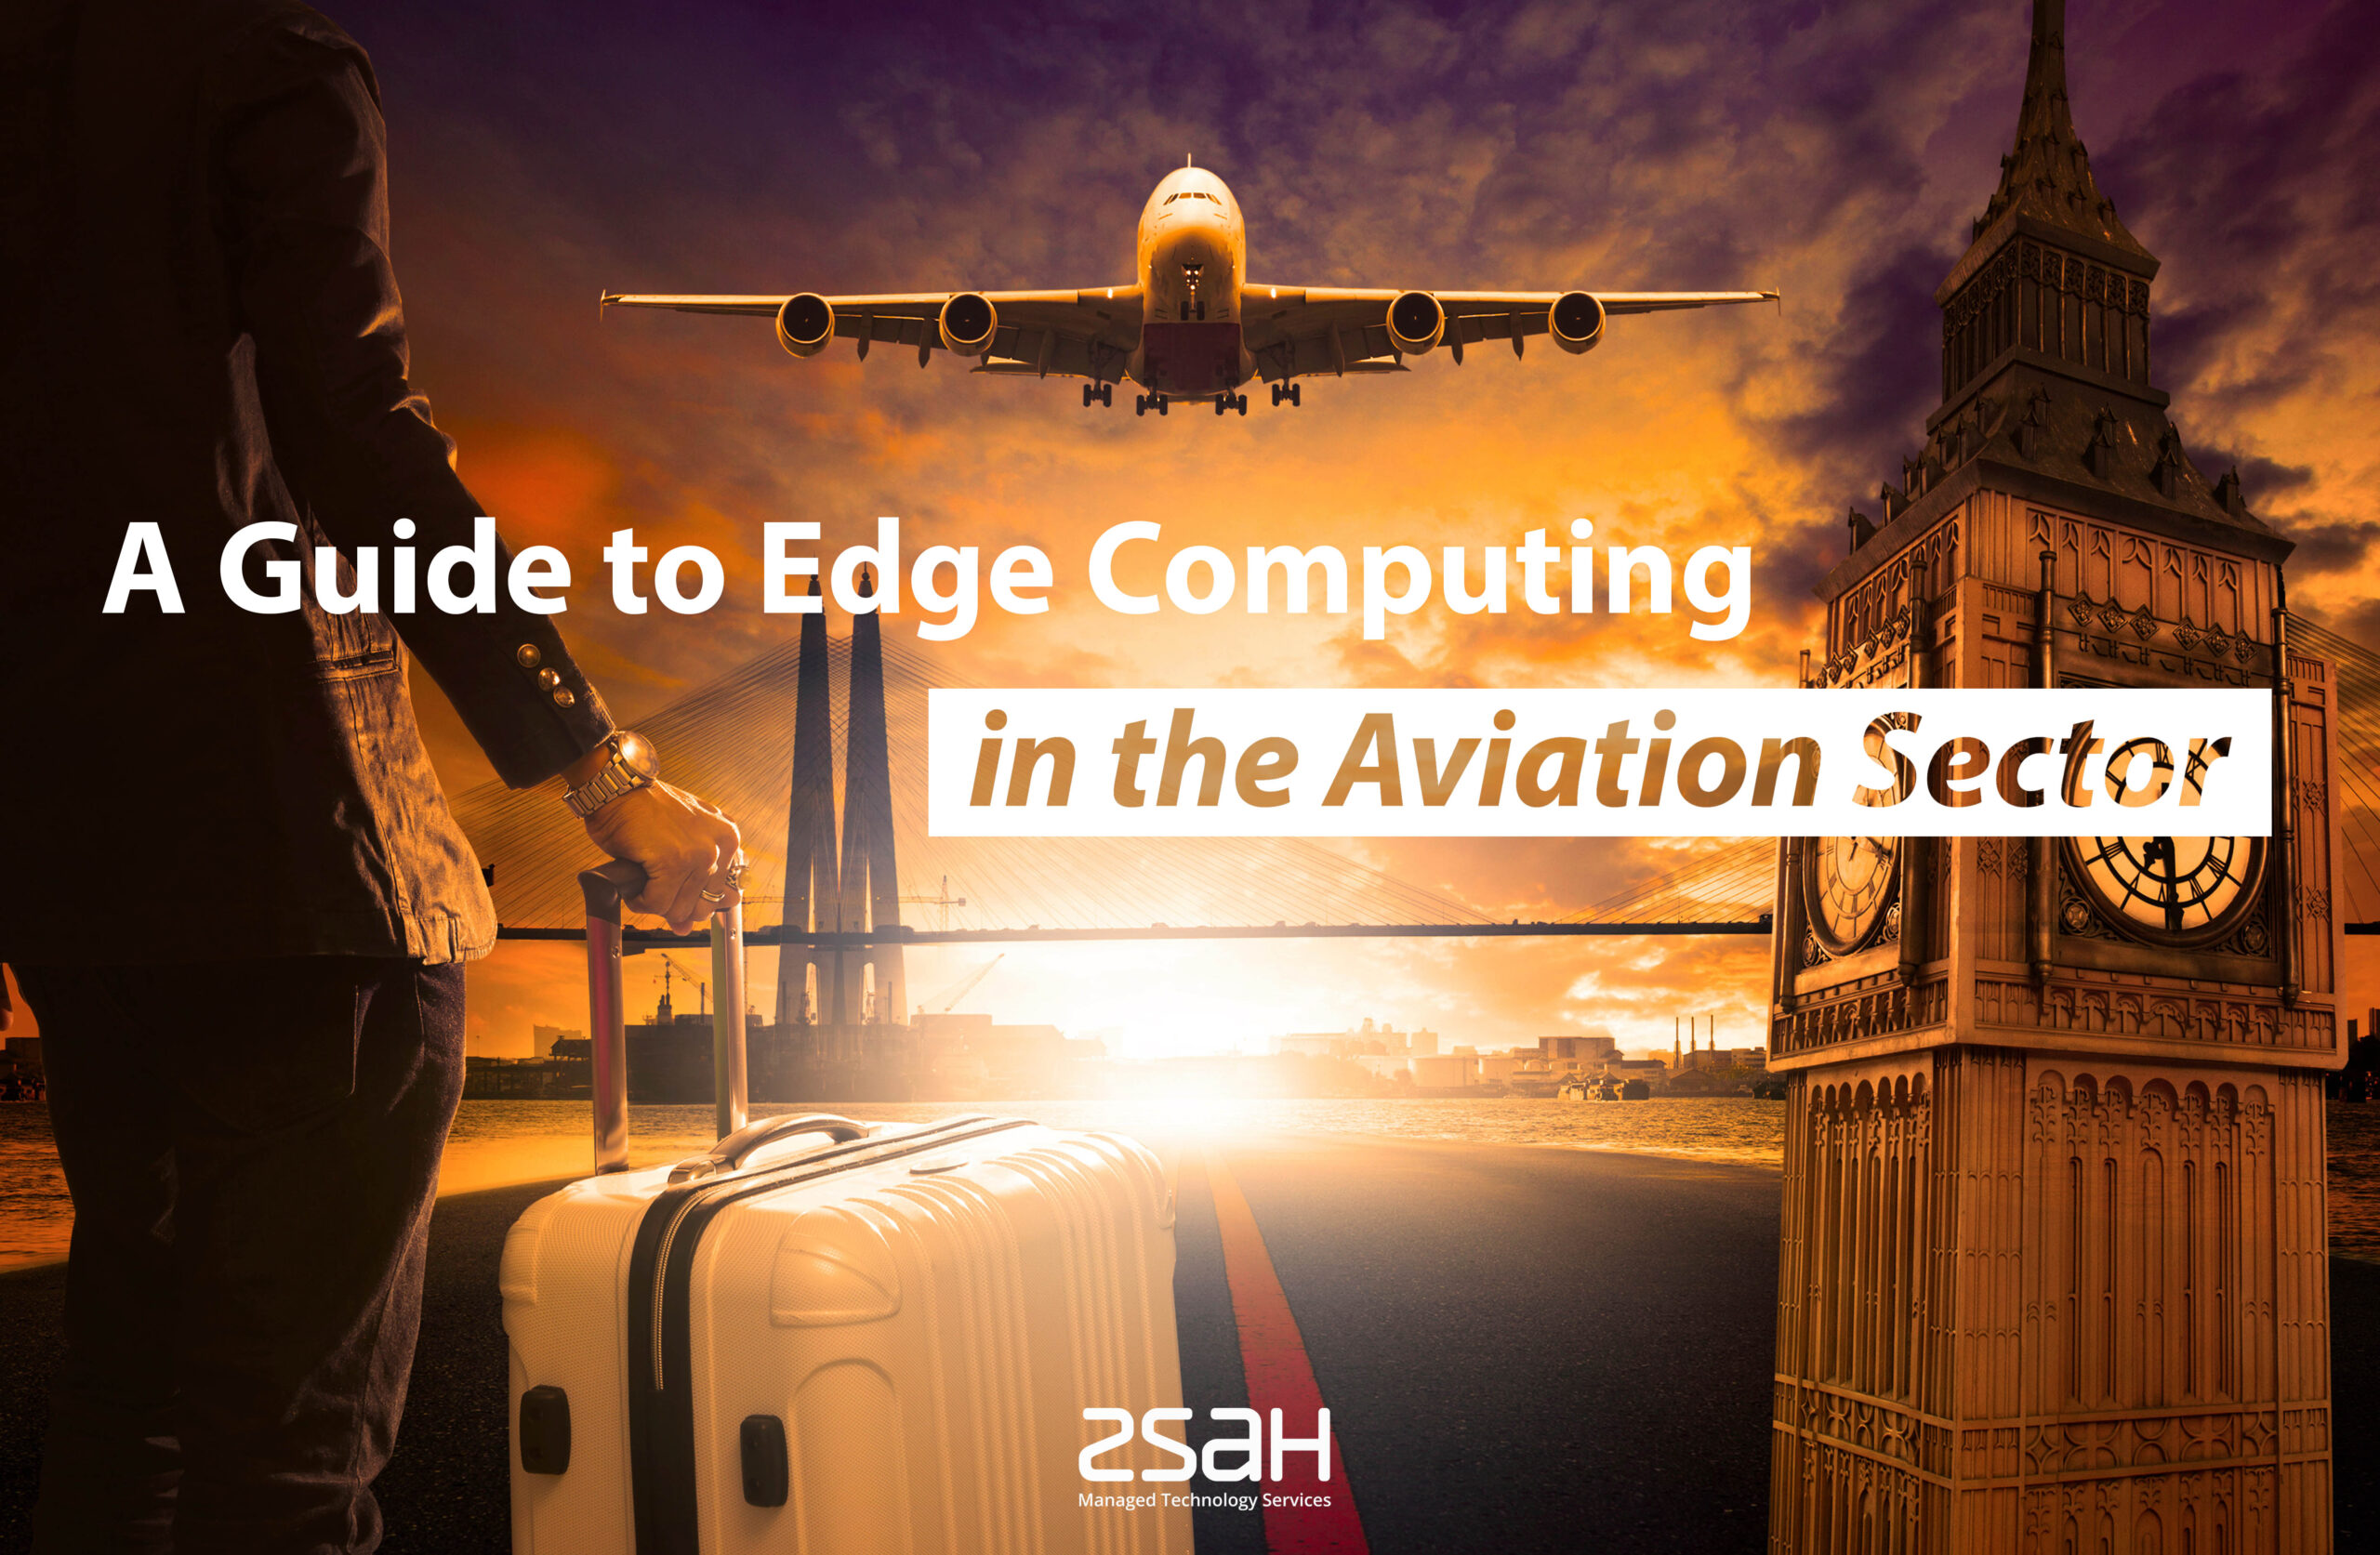 A Guide to Edge Computing in the Aviation Sector - zsah